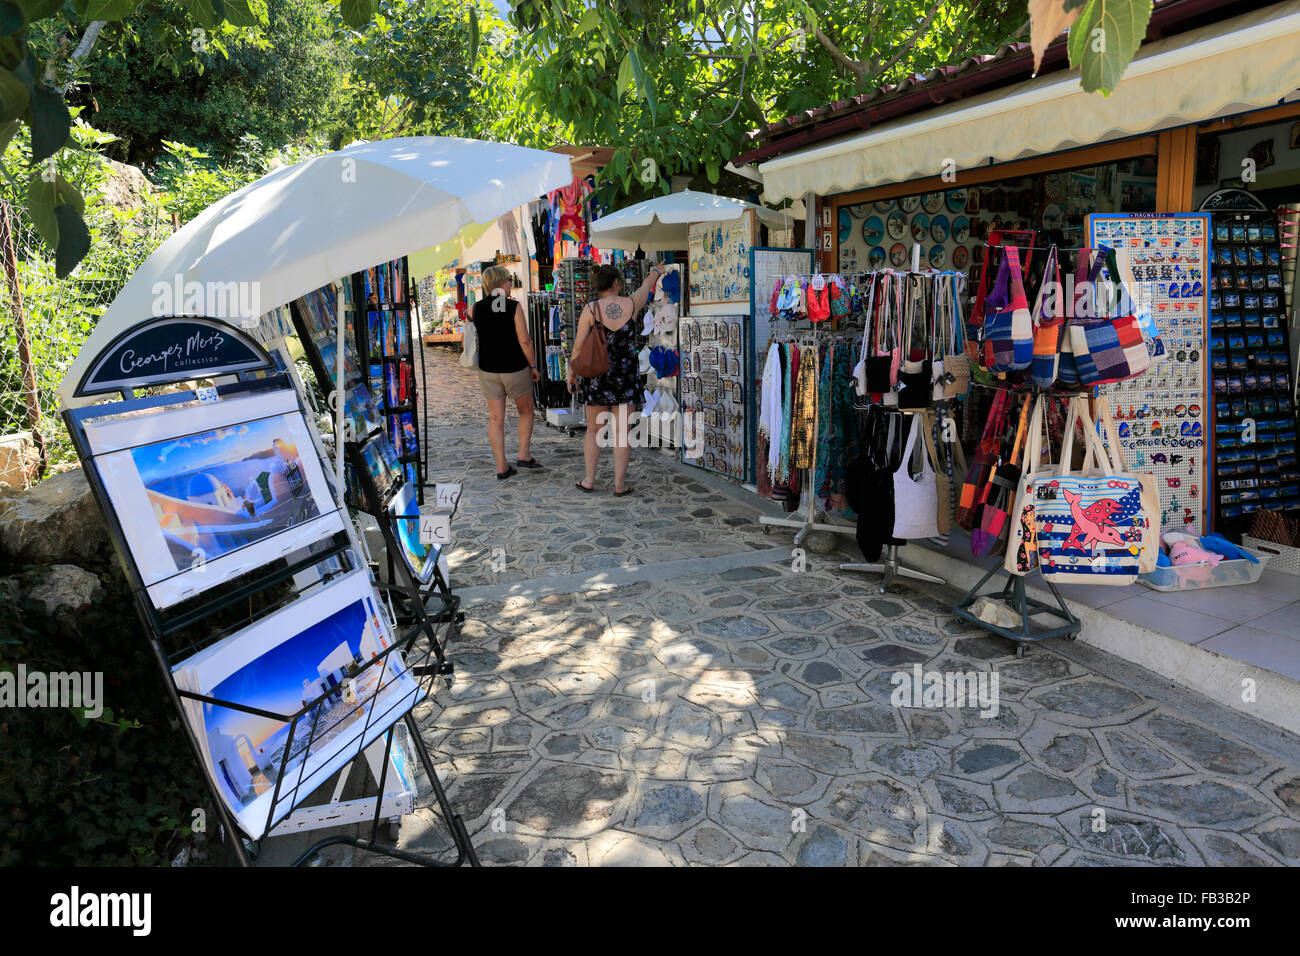 Tourist gifts in shops, Zia village, Kos Island, Dodecanese group of islands, South Aegean Sea, Greece. Stock Photo